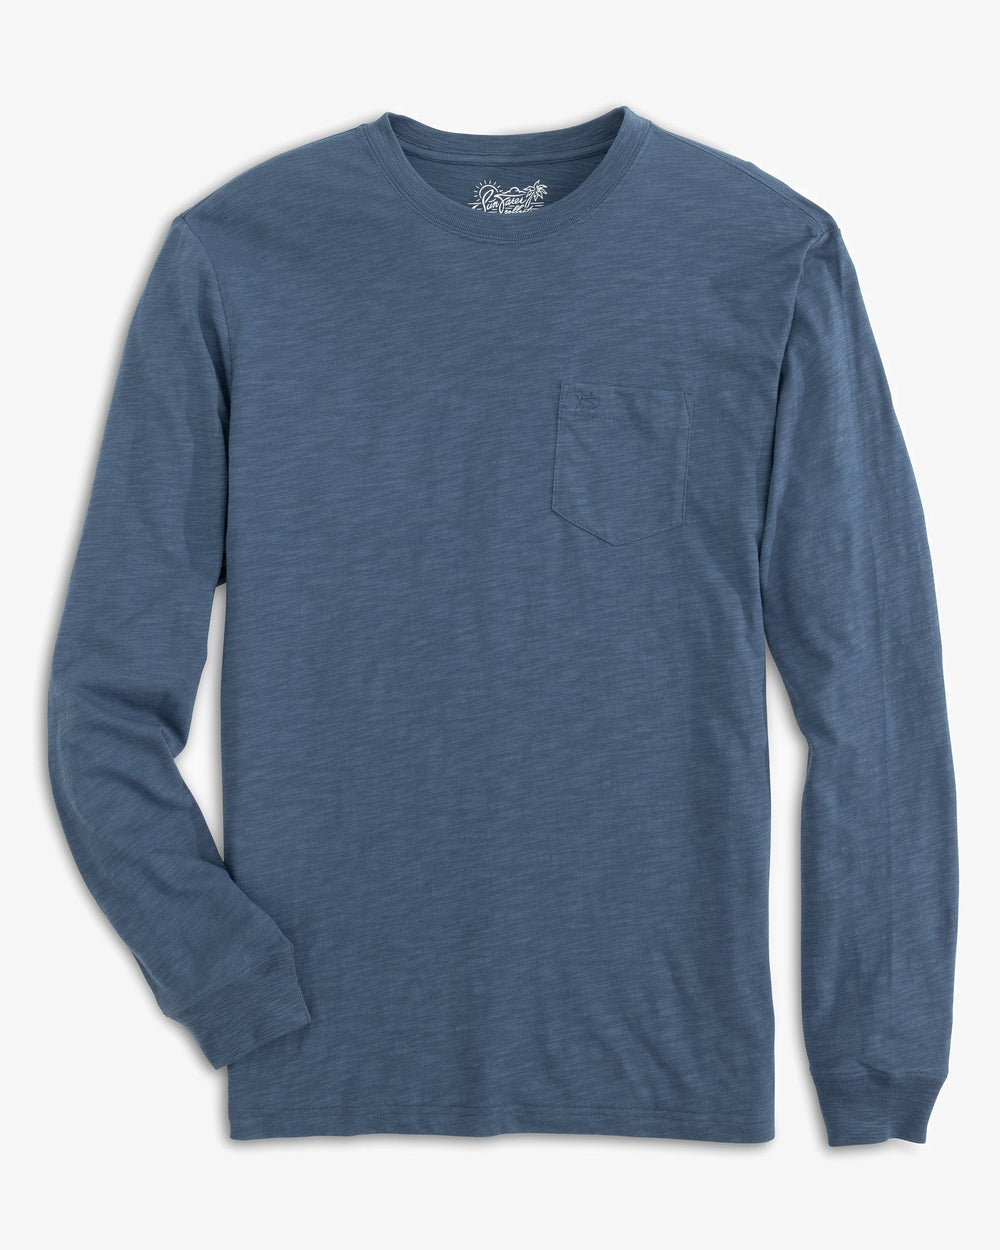 The front of the Men's Sun Farer Long Sleeve T-Shirt by Southern Tide - Dark Denim